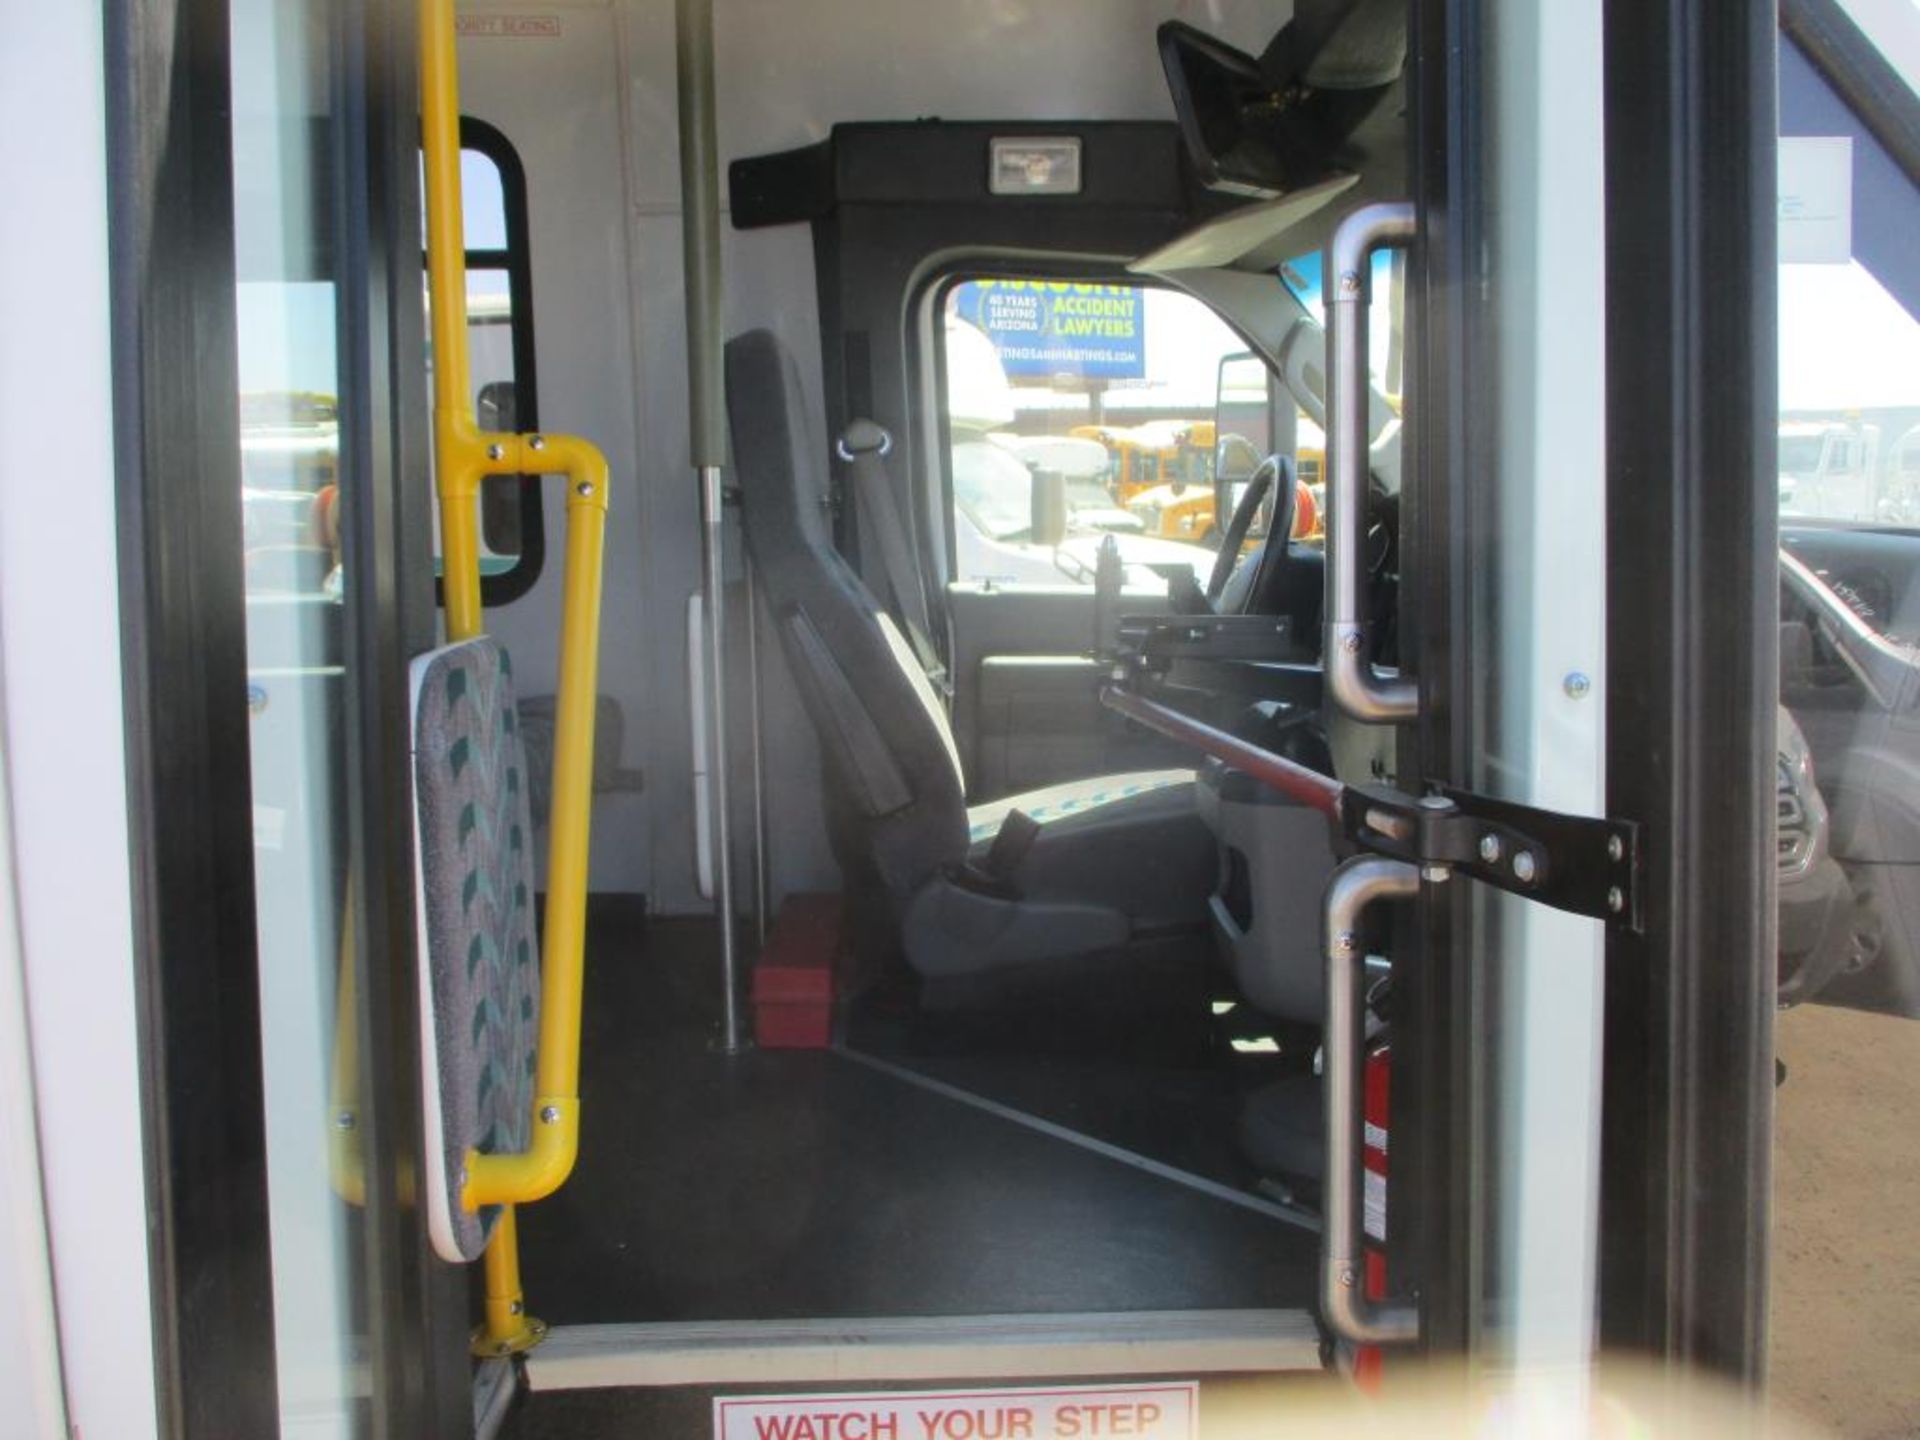 2011 Ford E-350 Shuttle Bus - Image 5 of 13